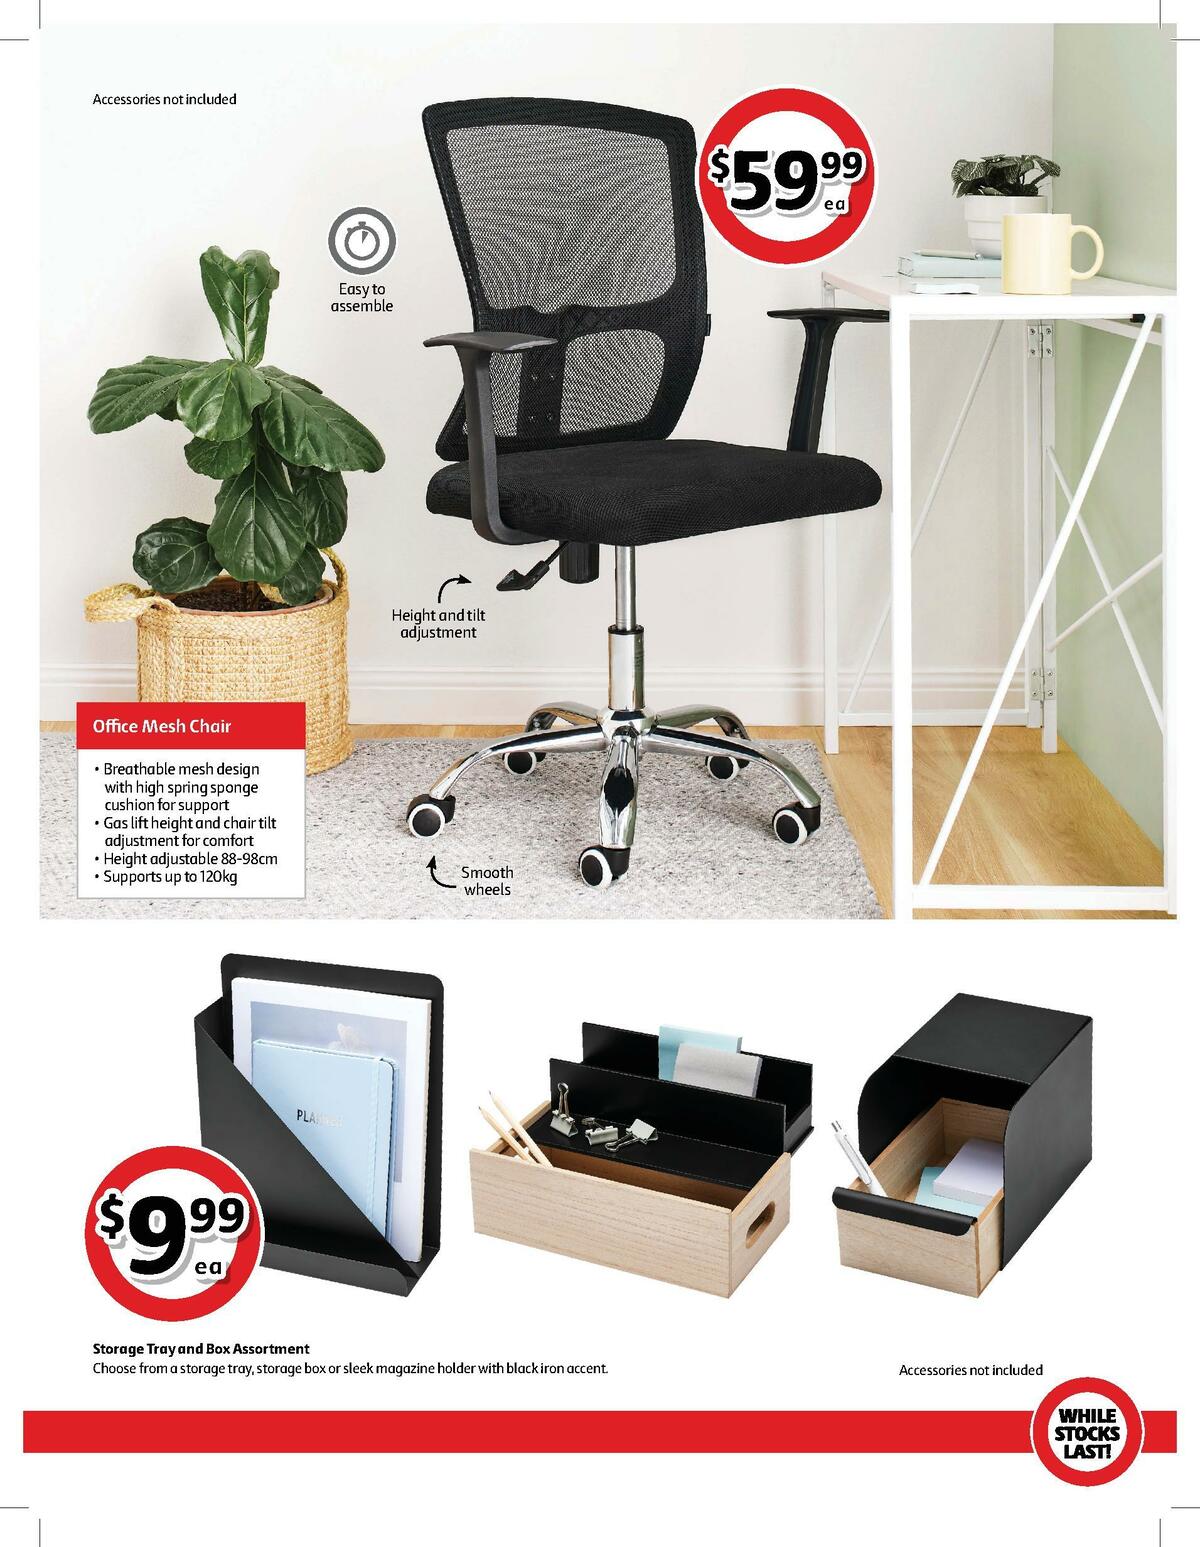 Coles Best Buys - Home Office Catalogues from 28 January